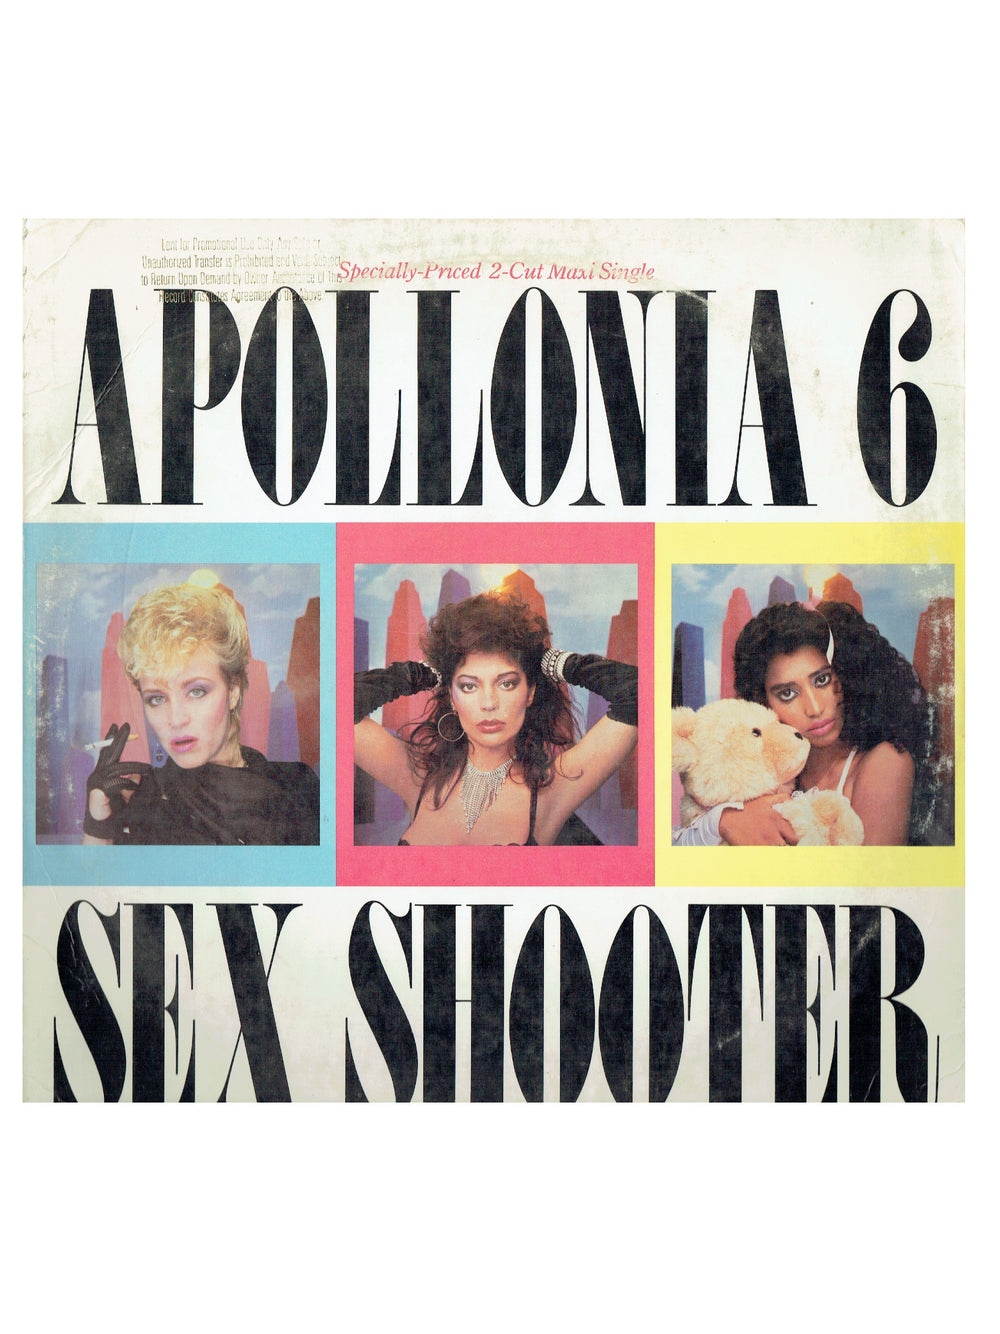 Prince – Apollonia 6 Sex Shooter 12 Inch Vinyl Single USA Release Prince GOLD STAMP